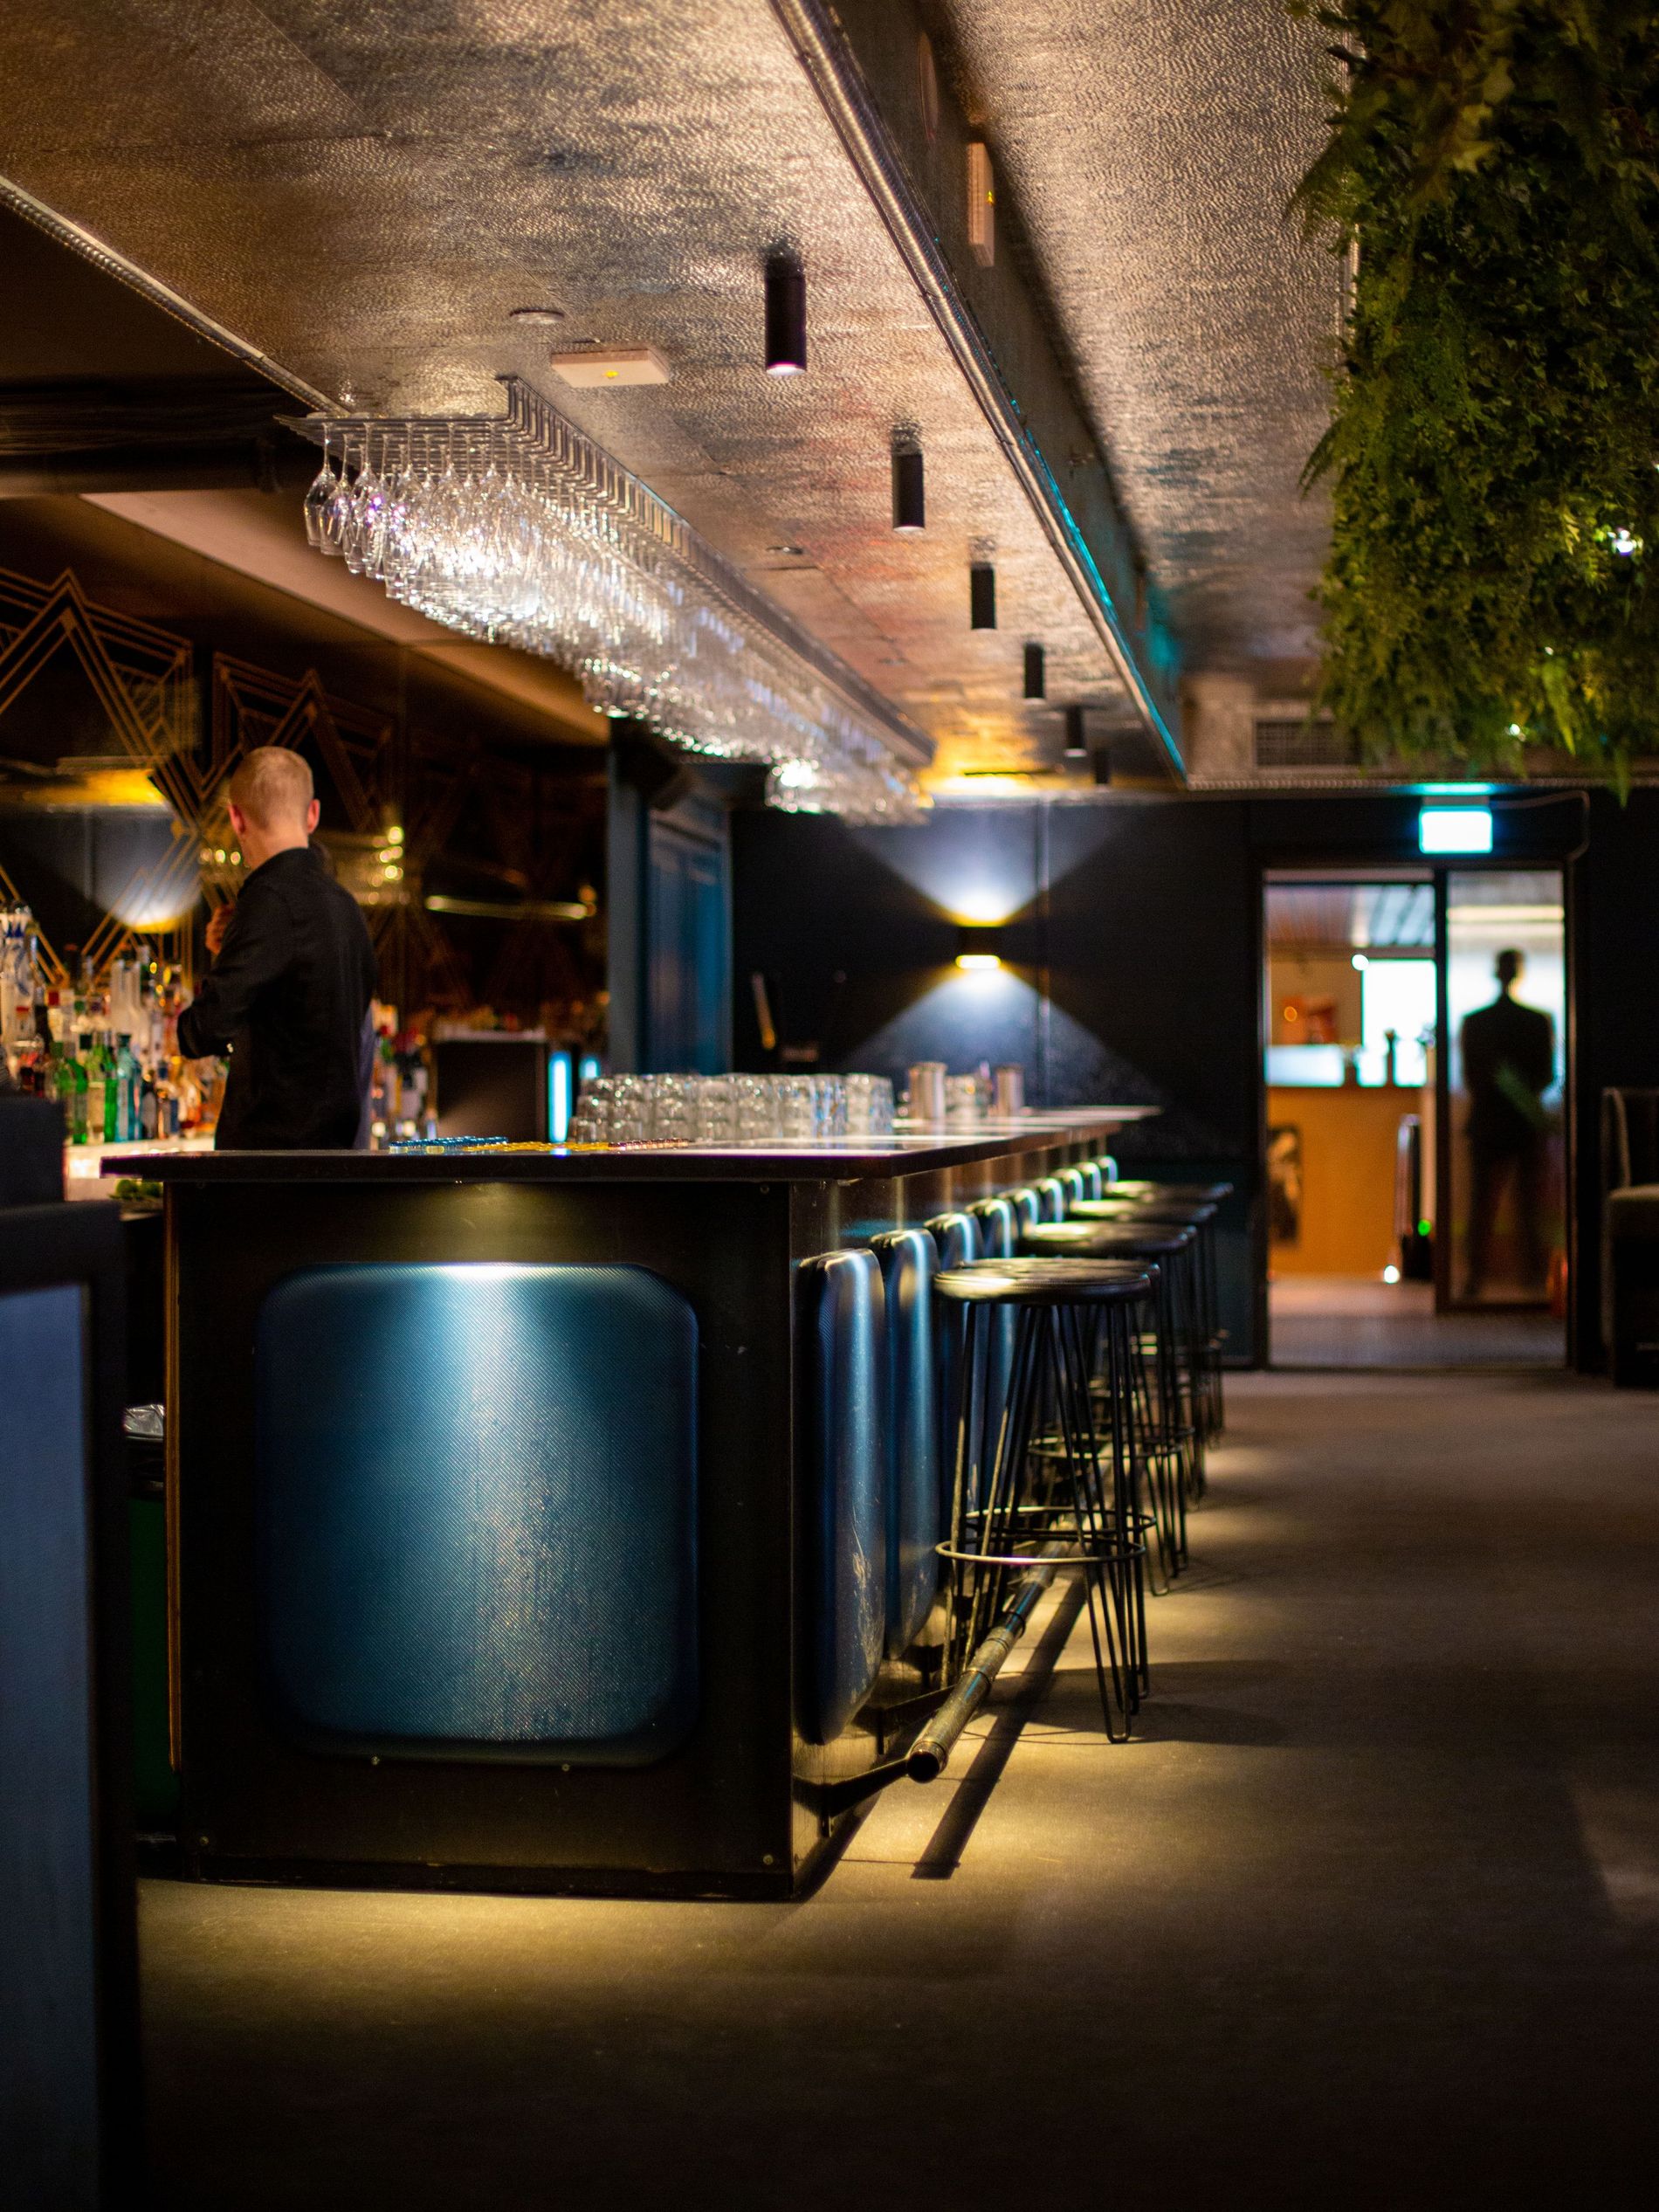 Tjalans offers a homely environment in Stockholm's nightlife